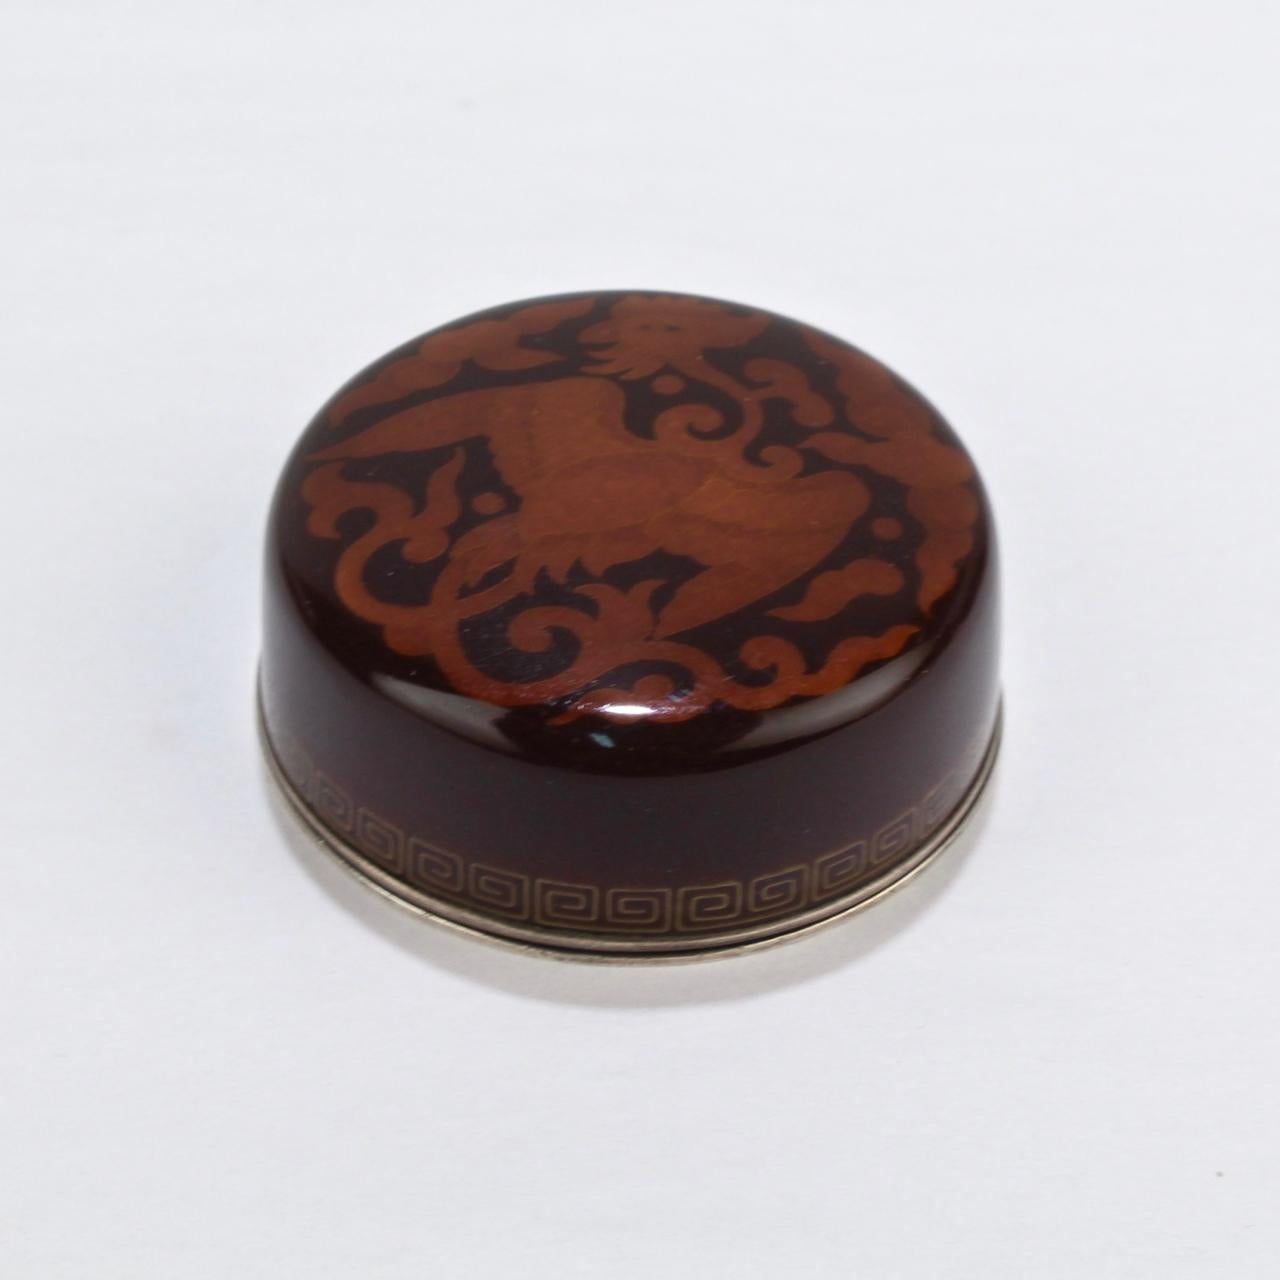 20th Century Signed Japanese Cloisonné Enamel Small Round Box with a Phoenix by Inaba